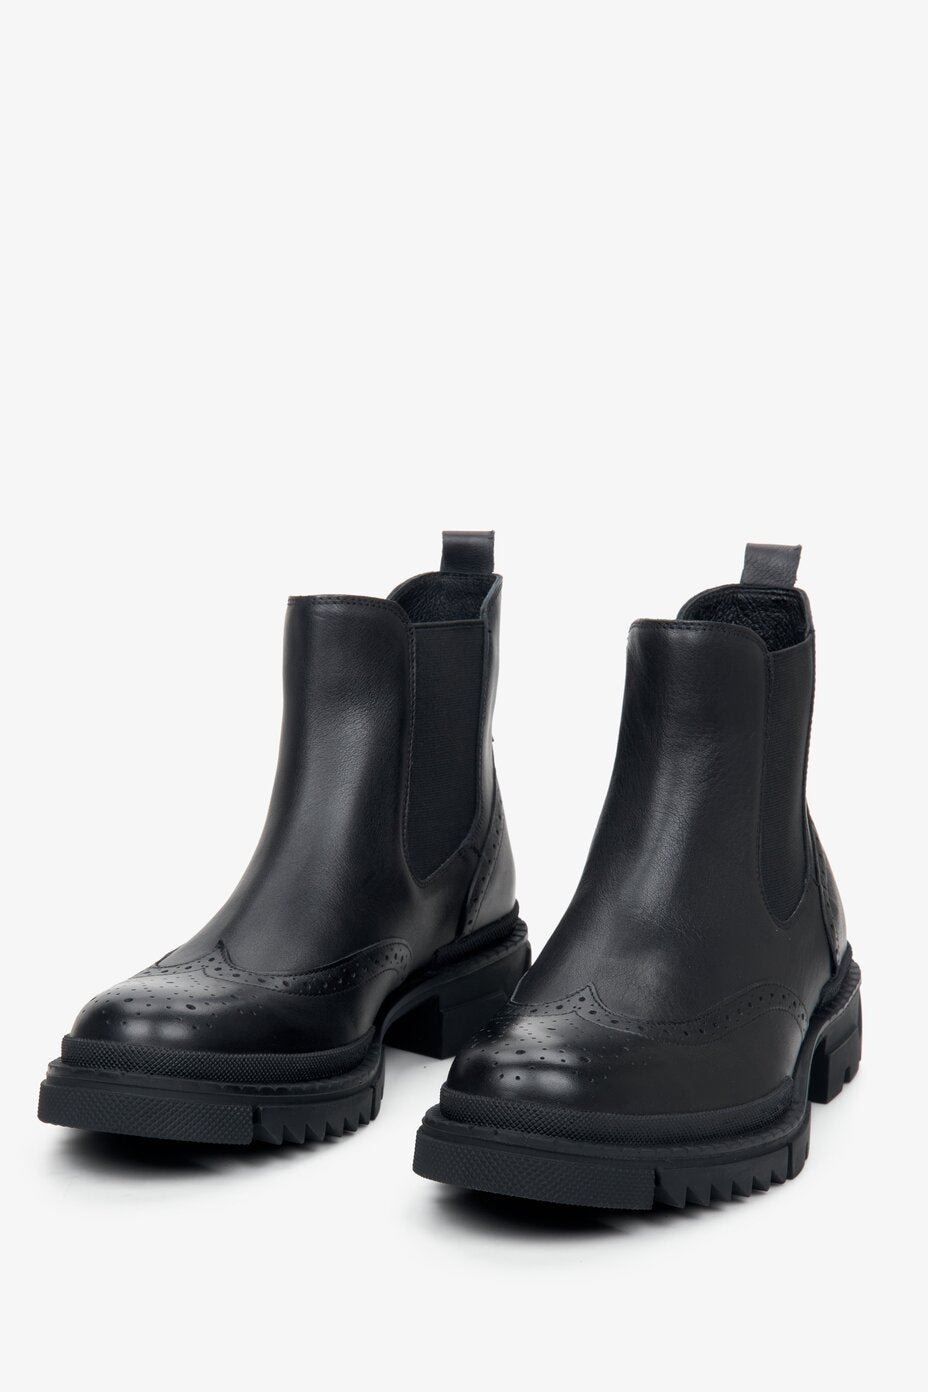 Men's black ankle boots by Estro with a leather upper - close-up on the front of the boot.